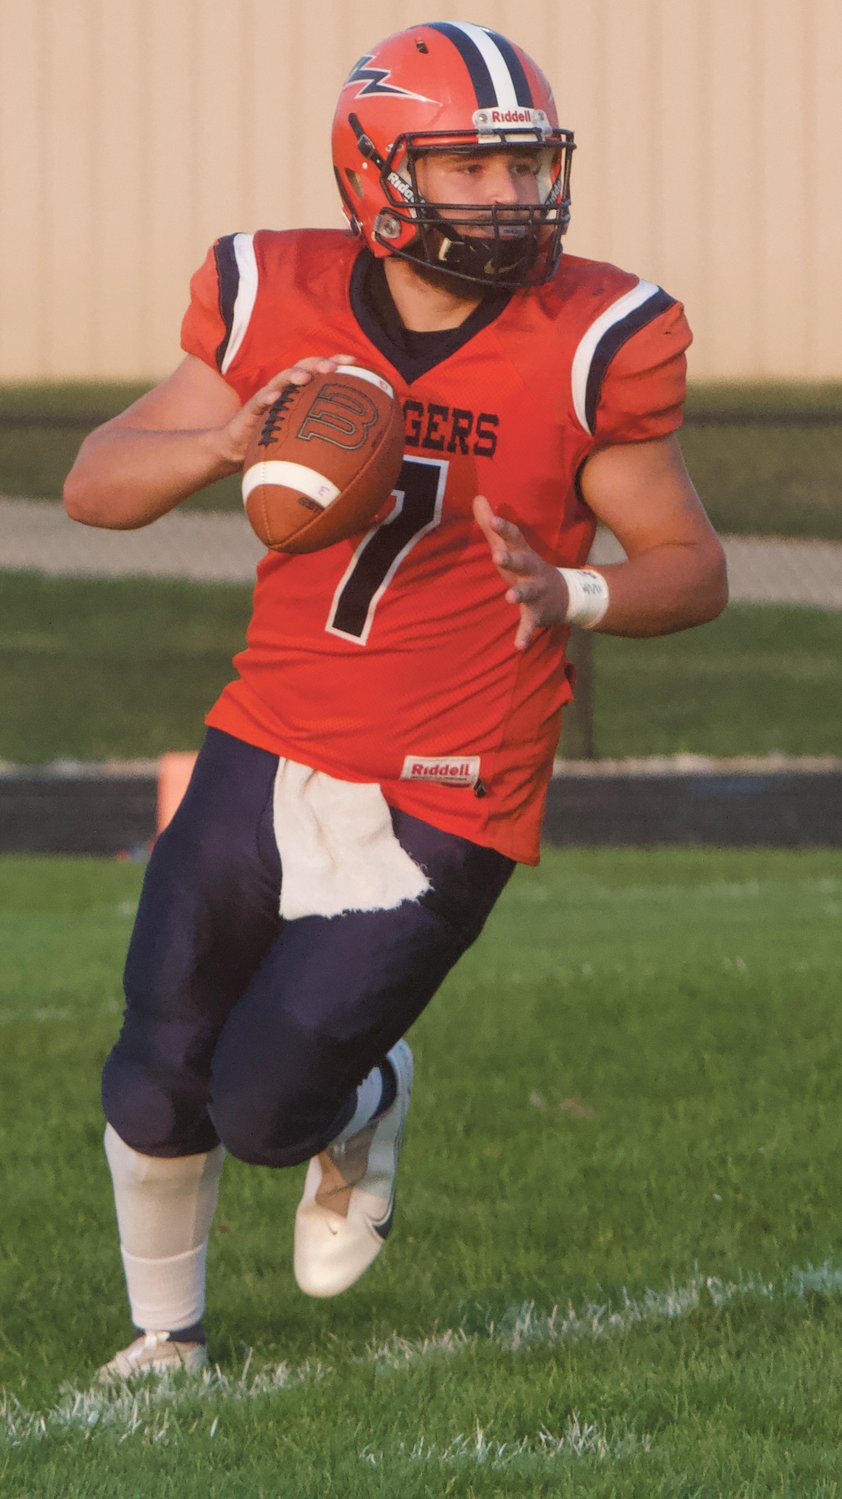 North Montgomery junior quarterback threw for 209 yards and four touchdowns in the Chargers' 44-38 win over Delphi on Friday night.